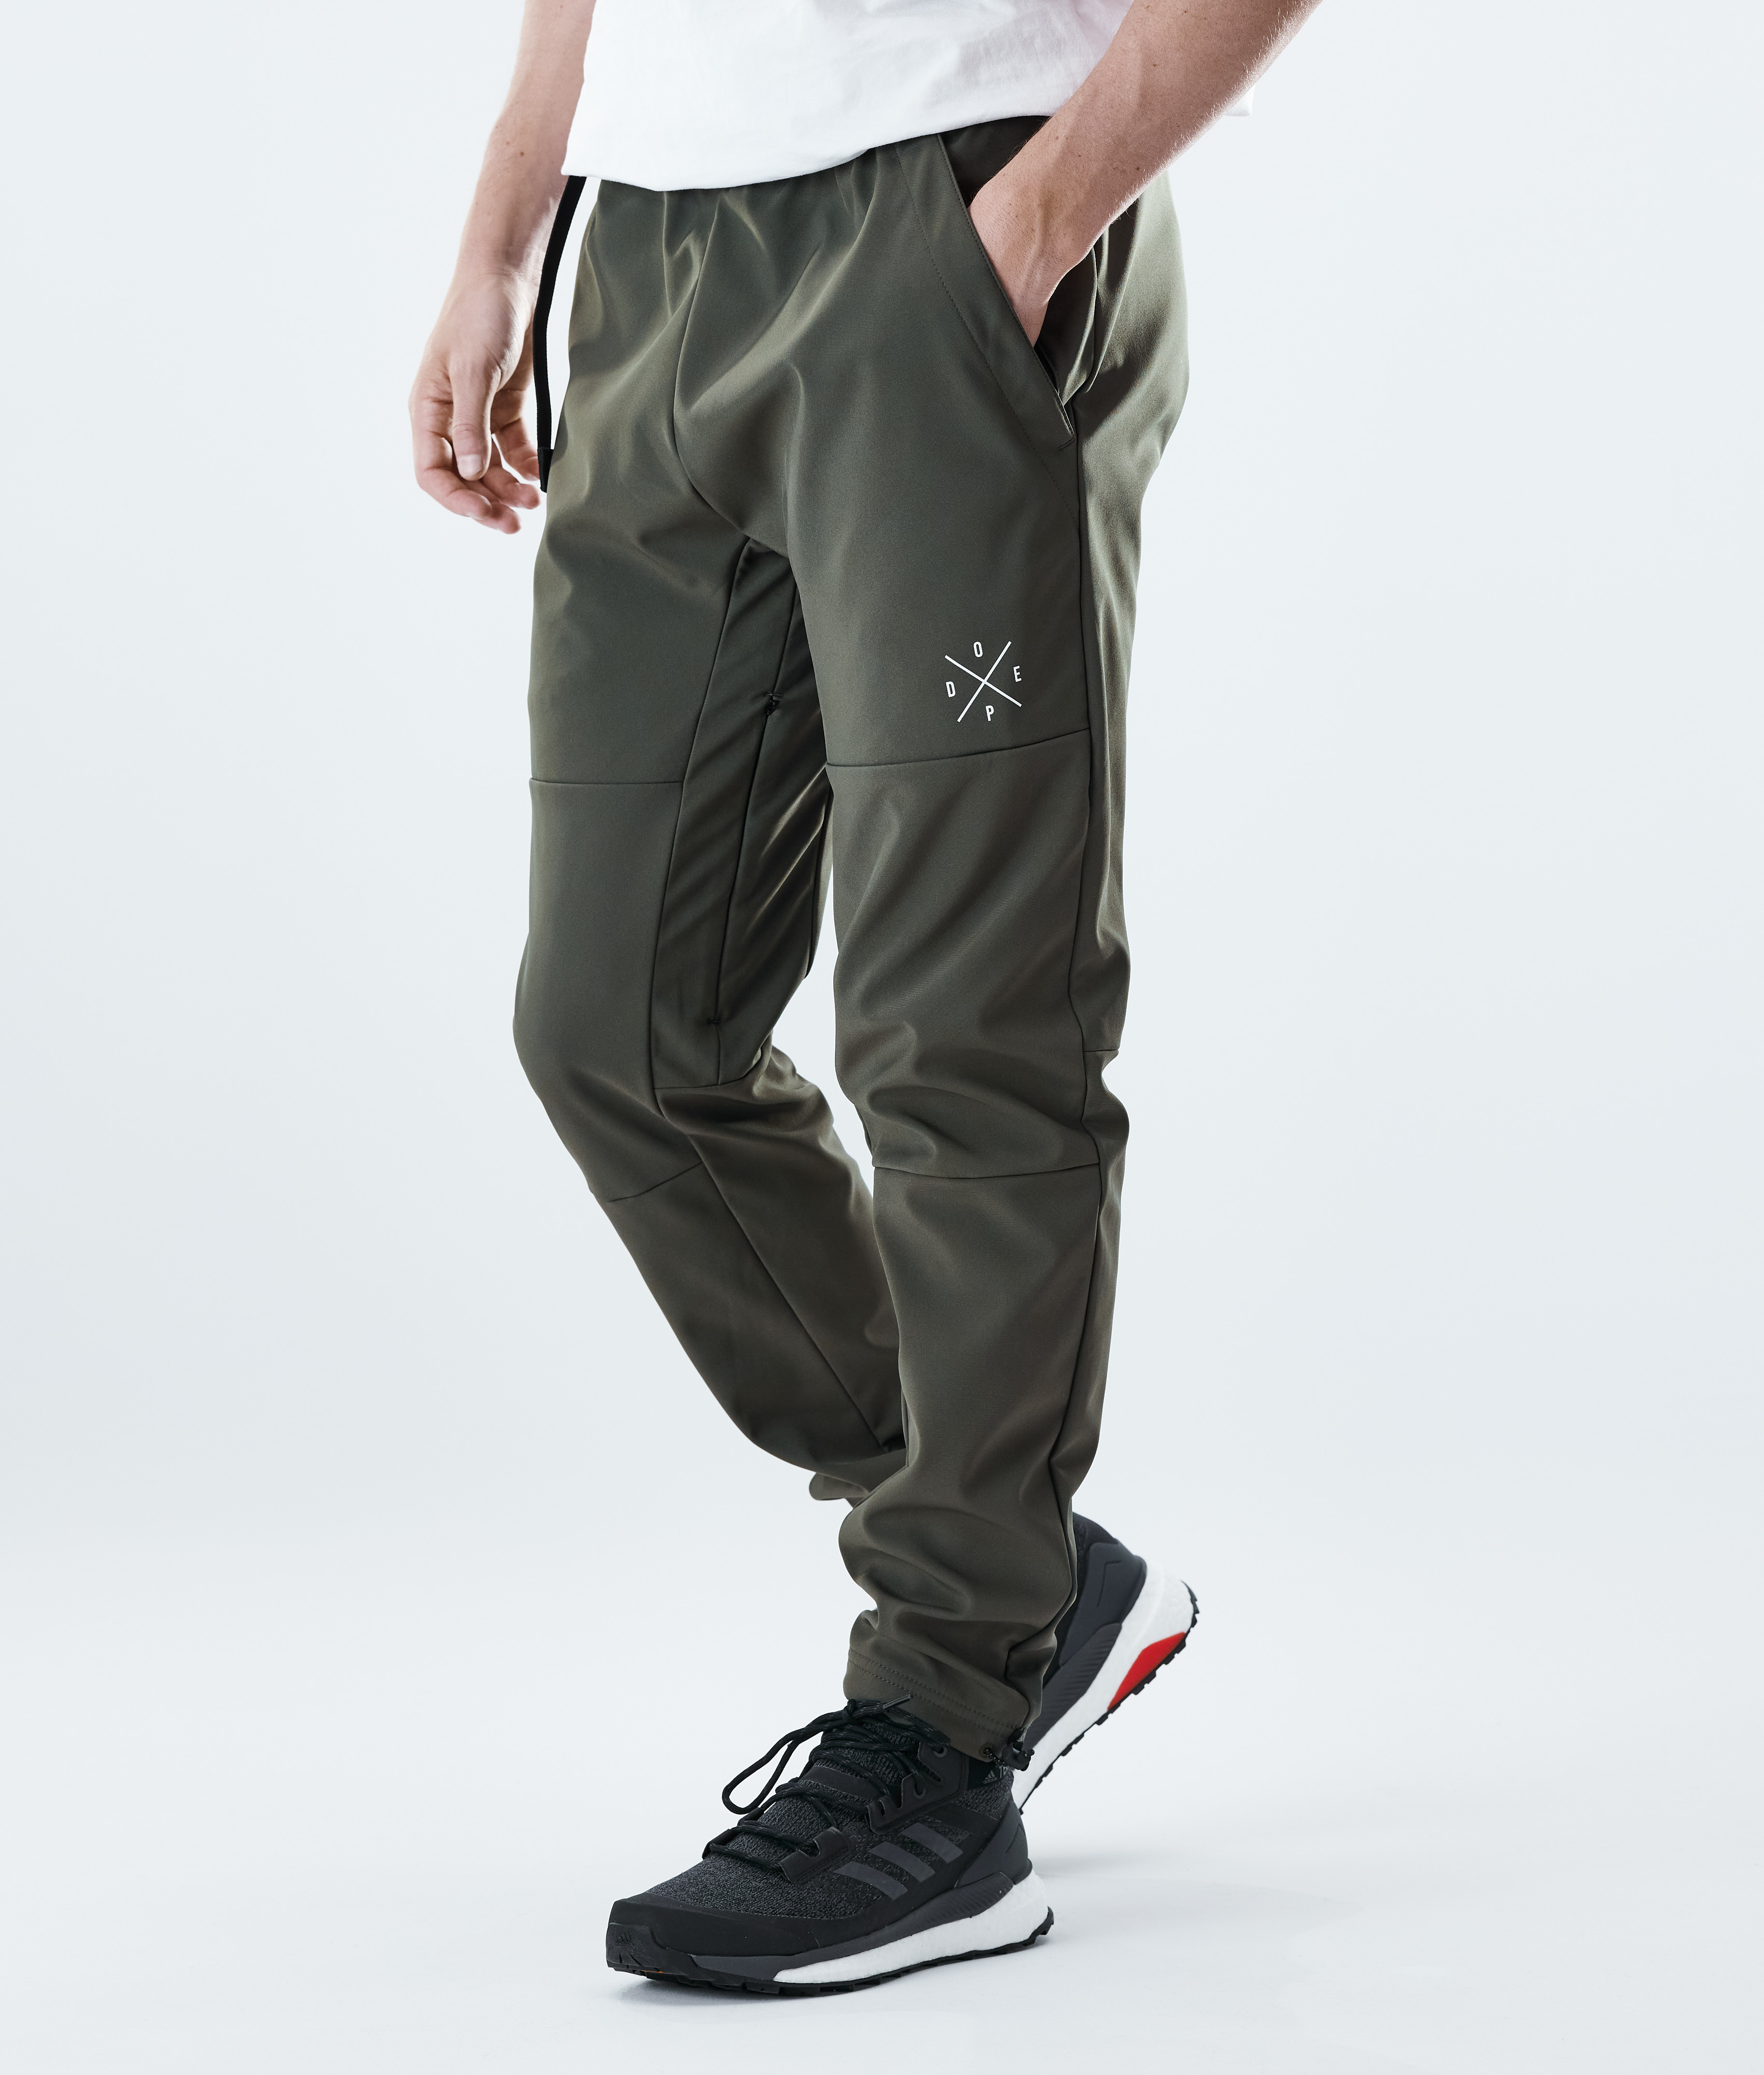 Nomad Outdoor Barrier Pant